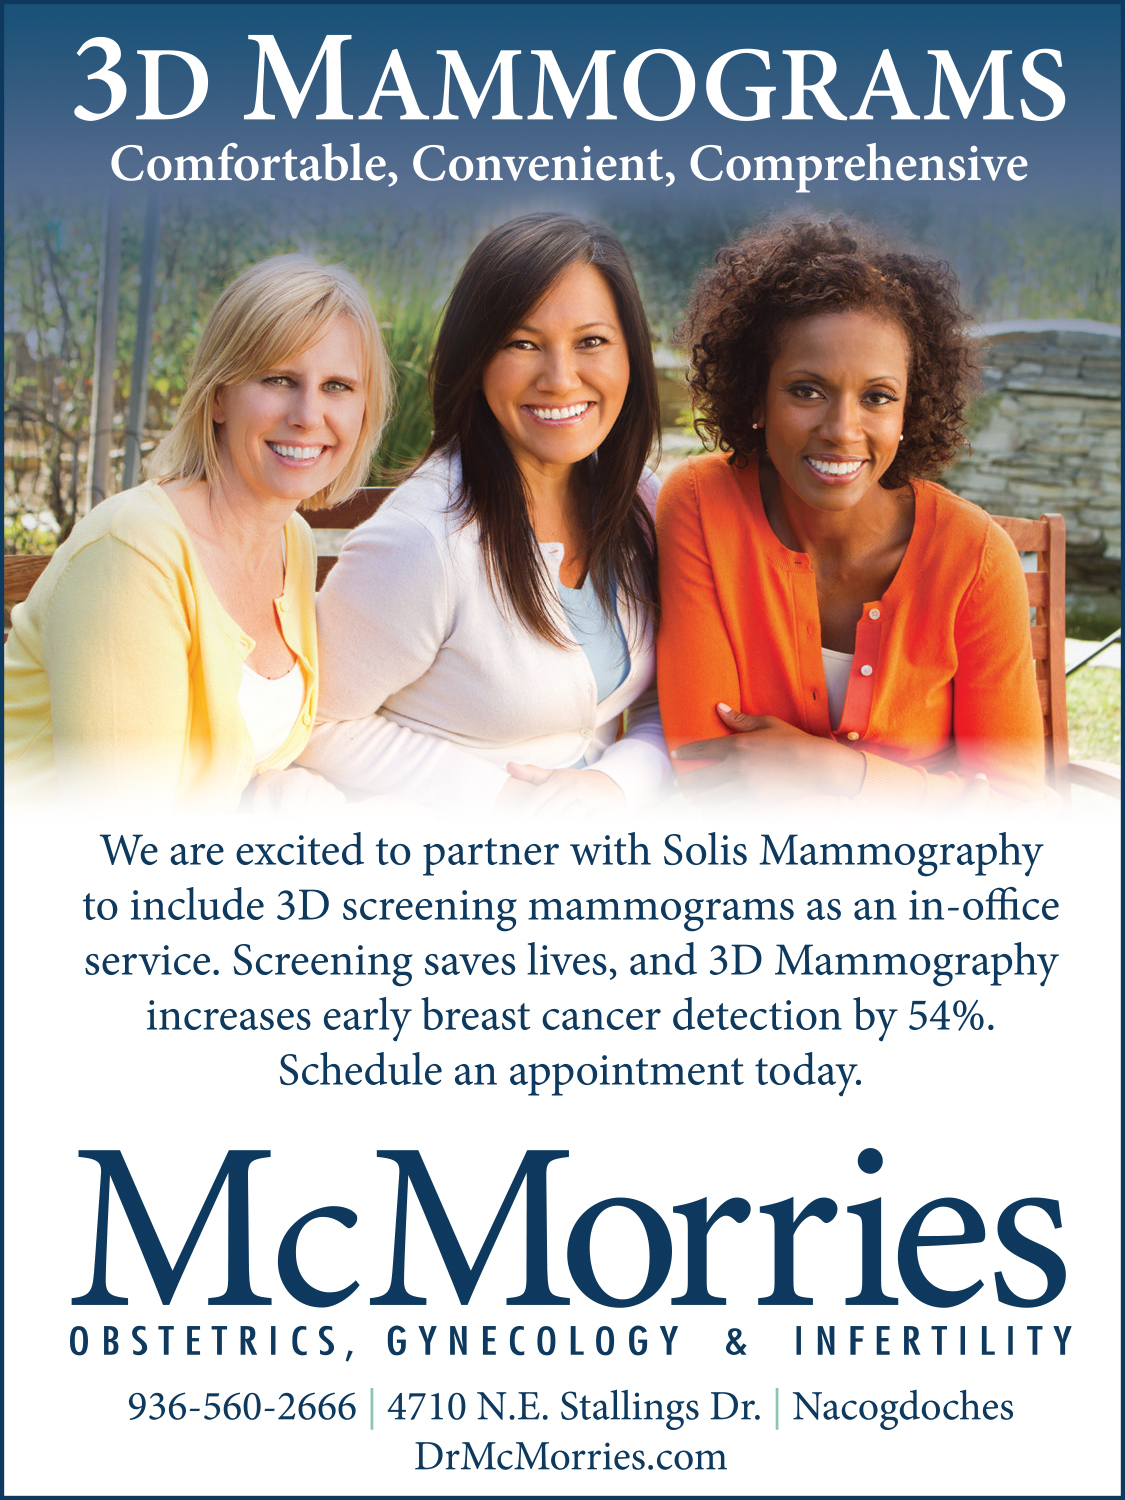 McMorries offers 3D Mammograms